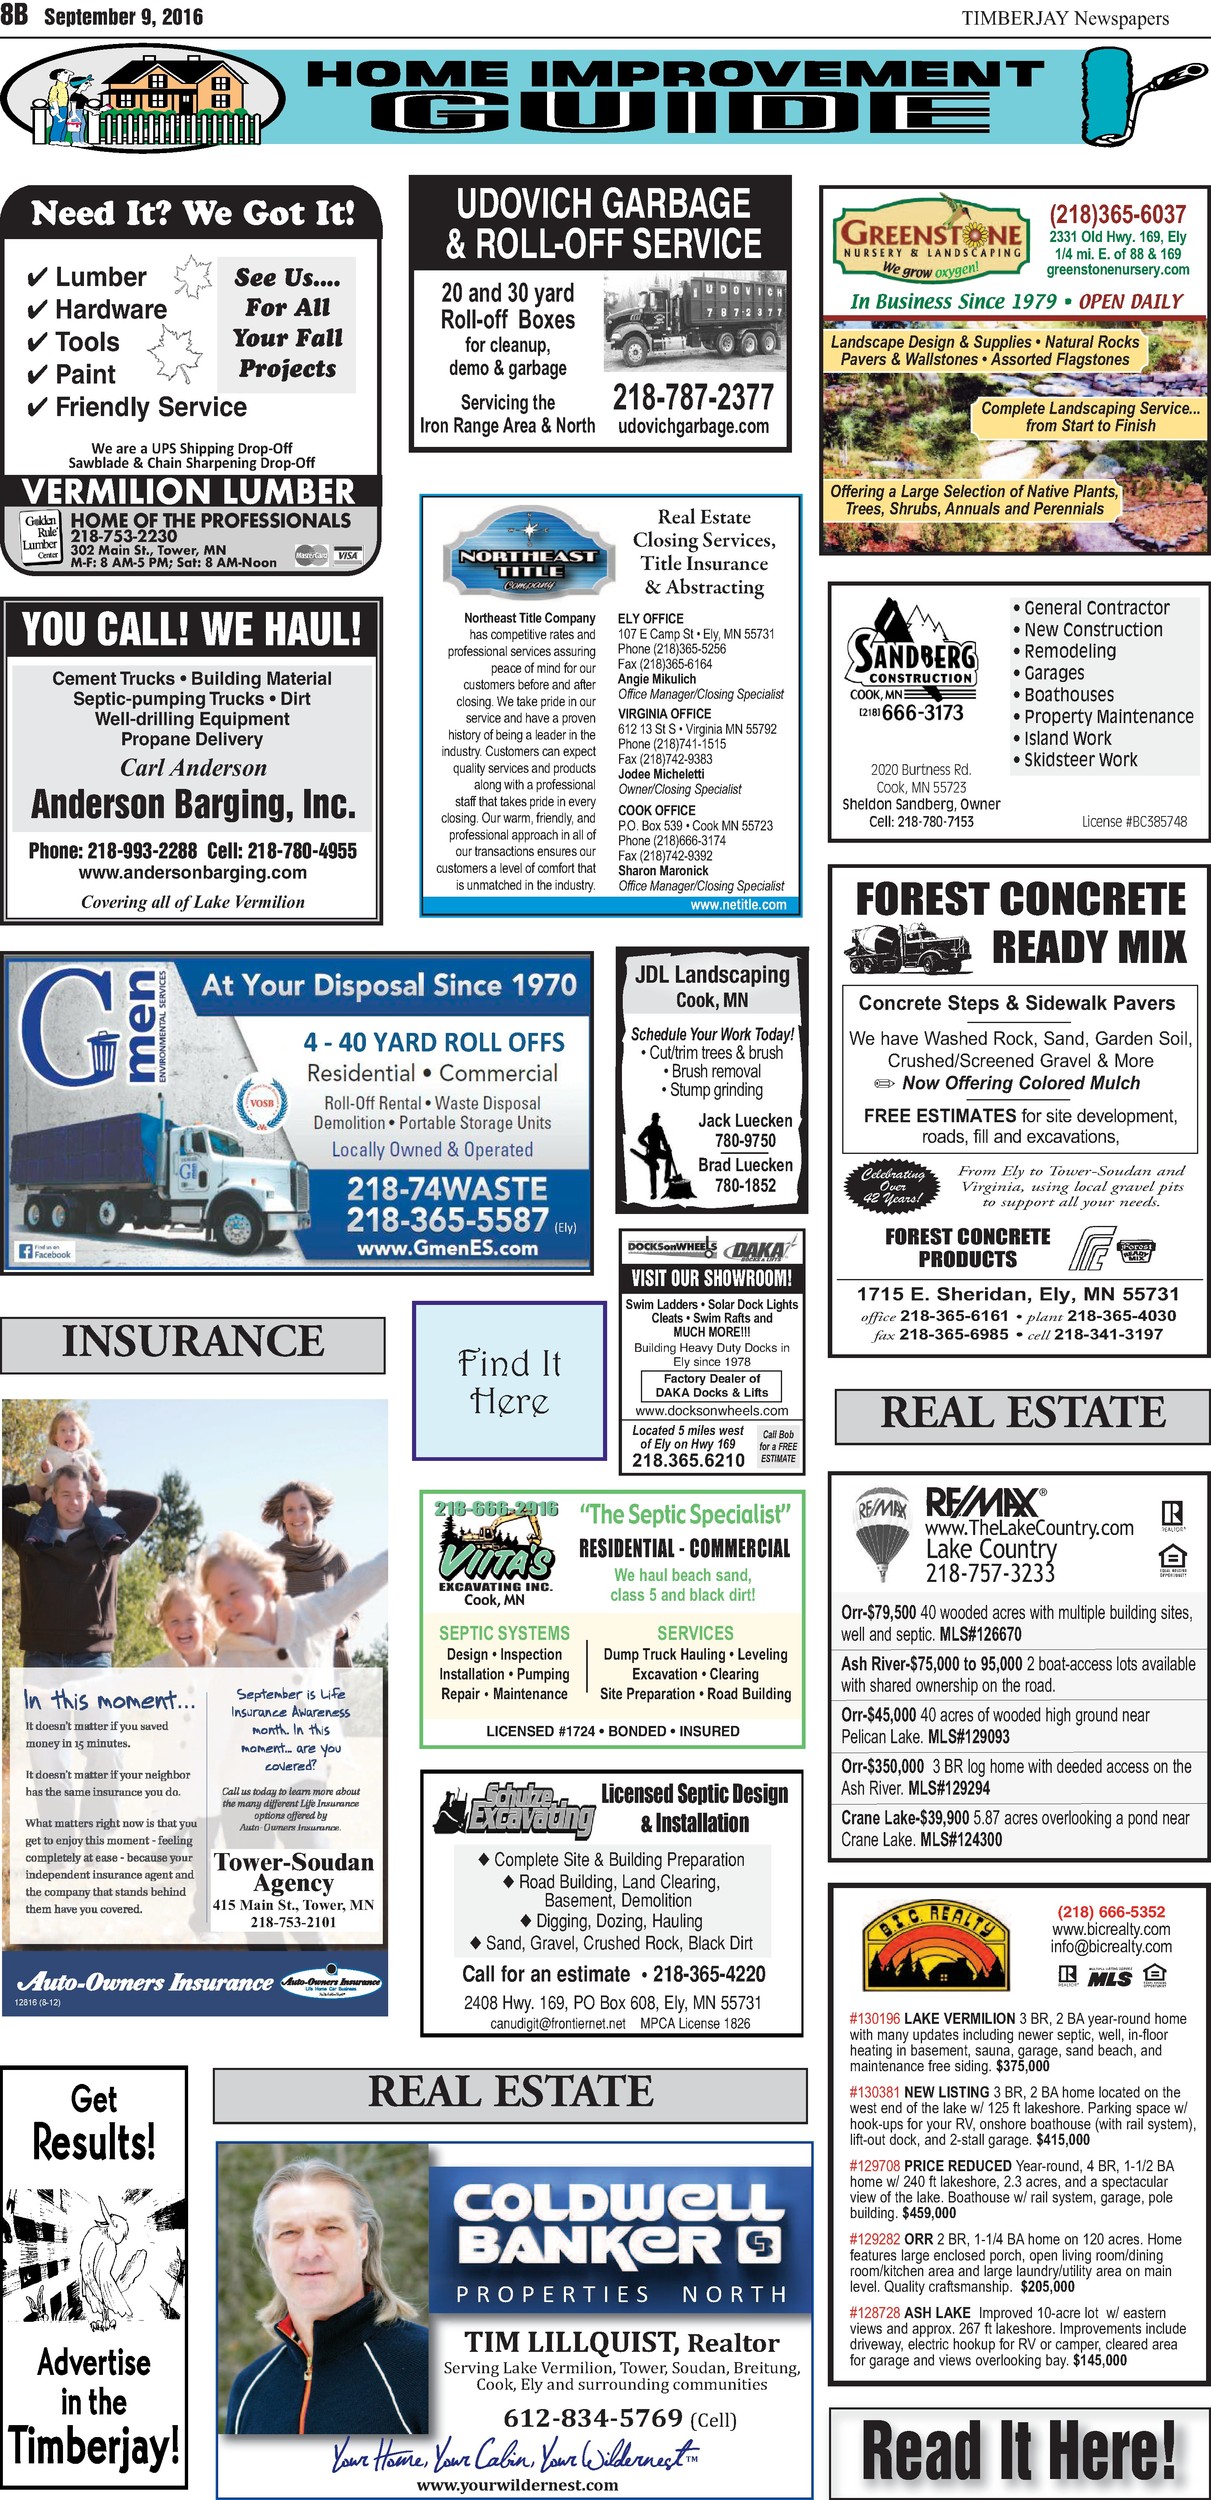 Click here to see the legal notices and classifieds on page 8B